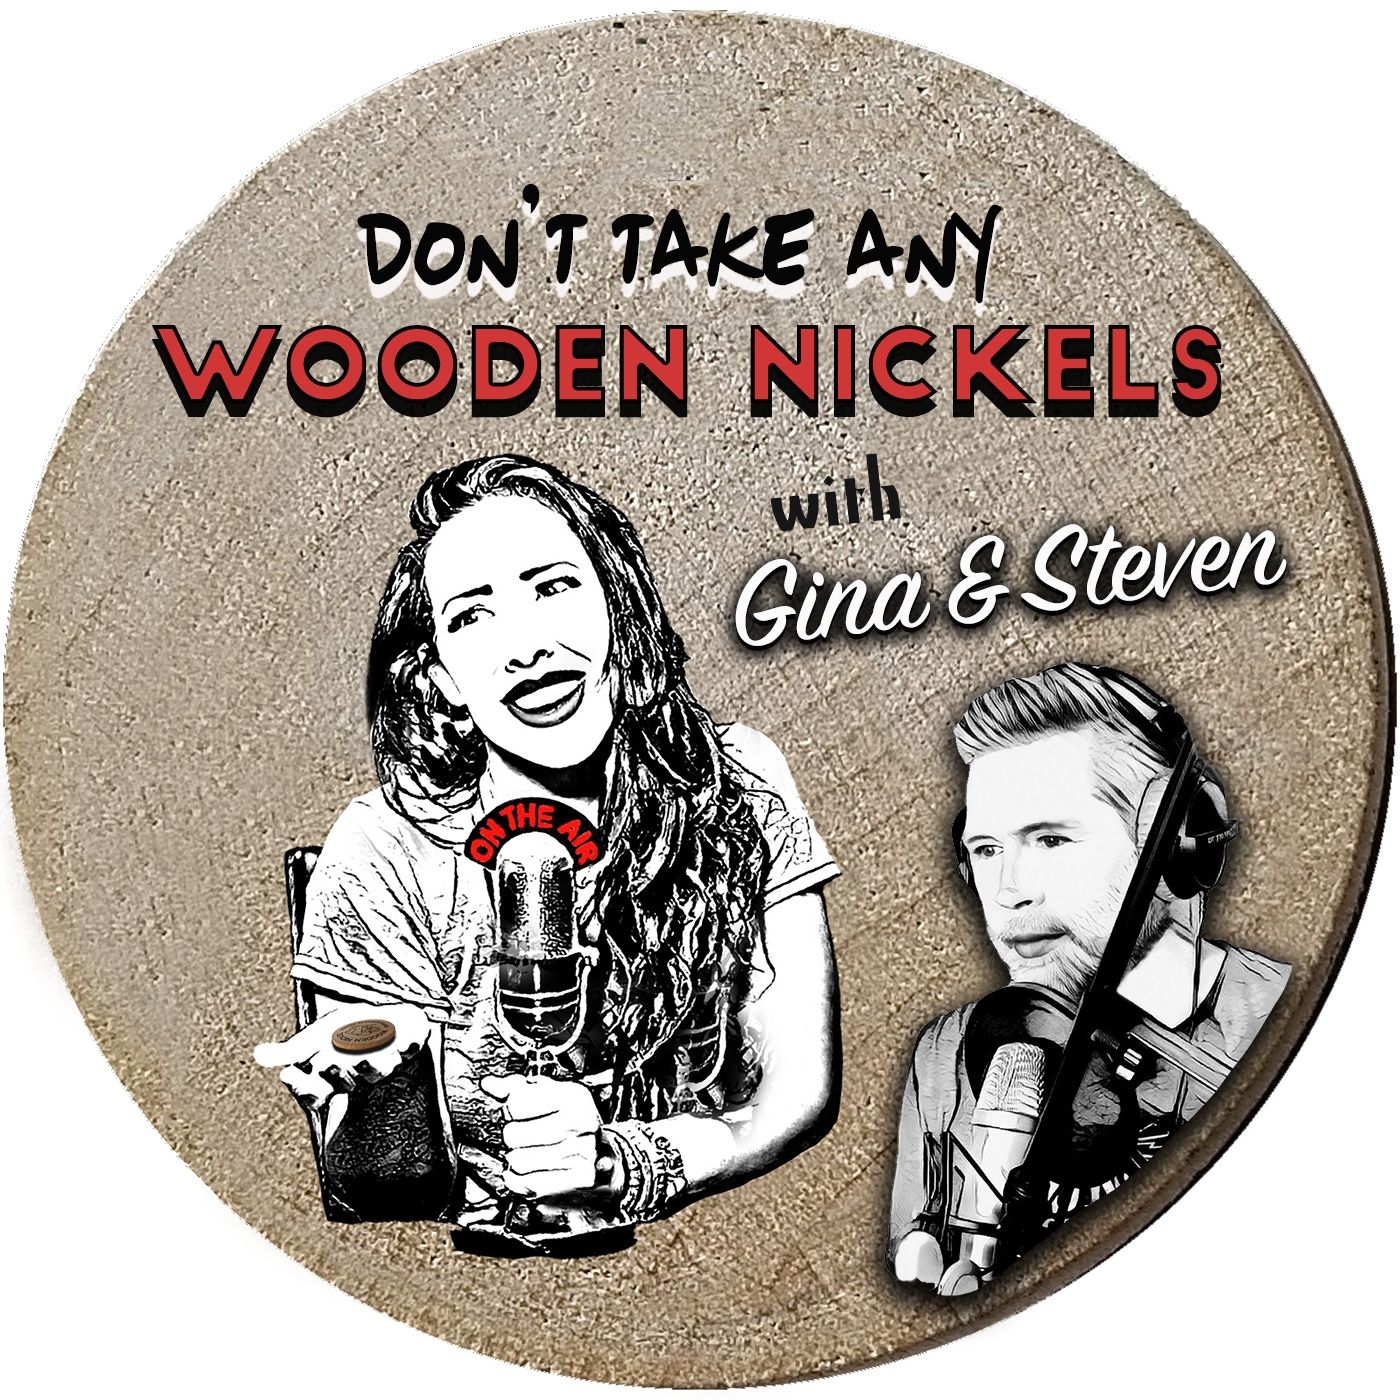 Don’t Take Any Wooden Nickels